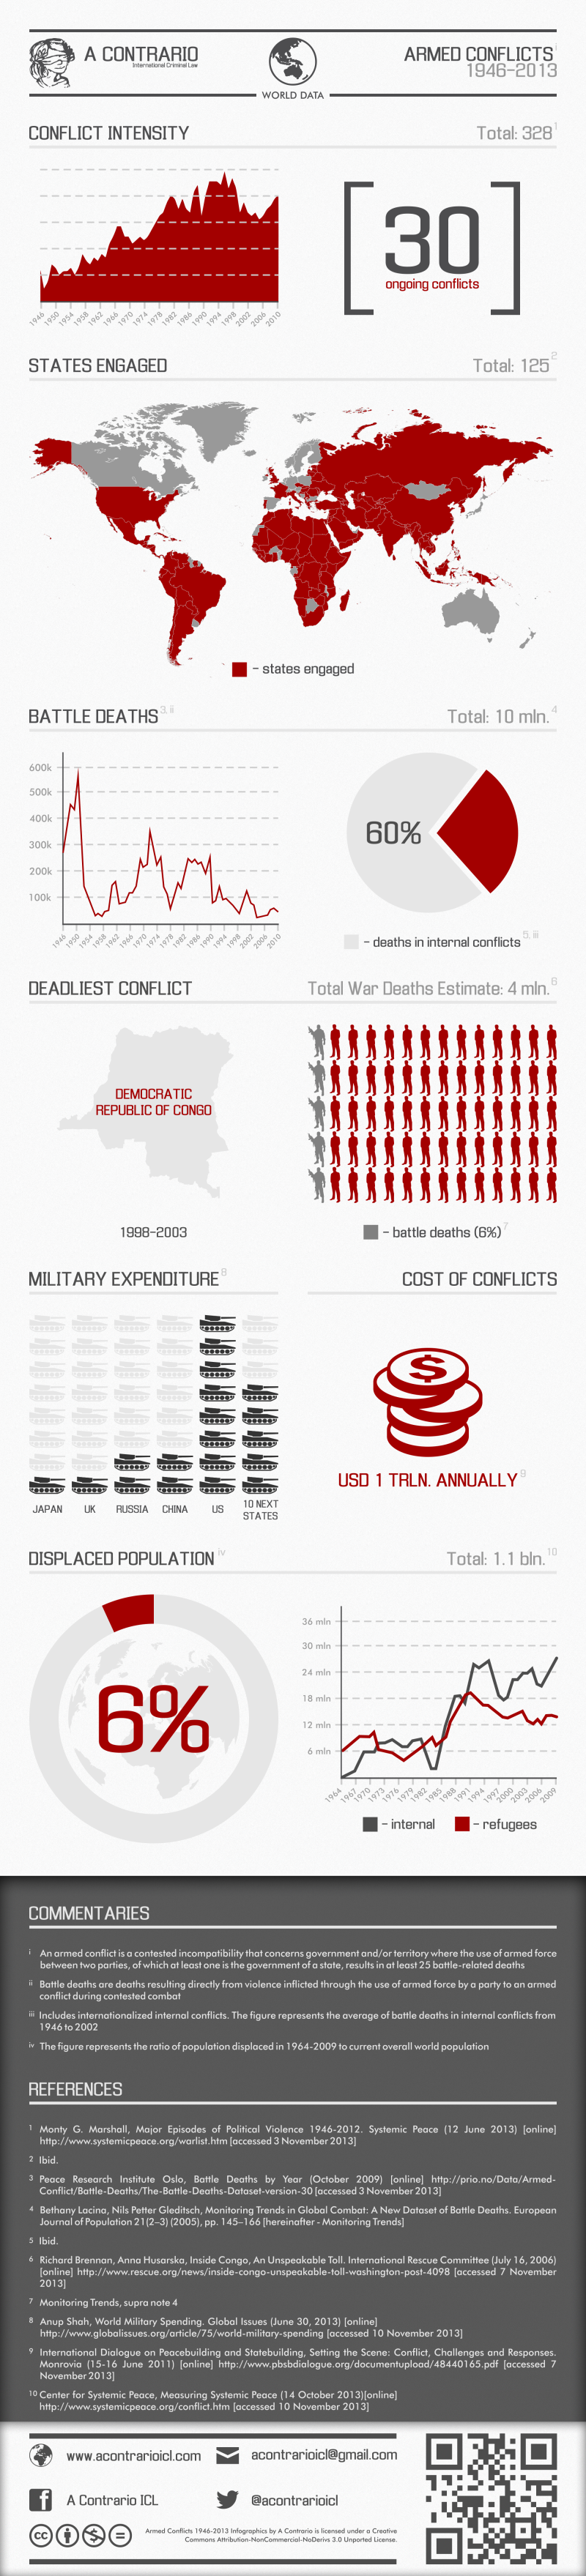 Infographic. Armed Conflicts